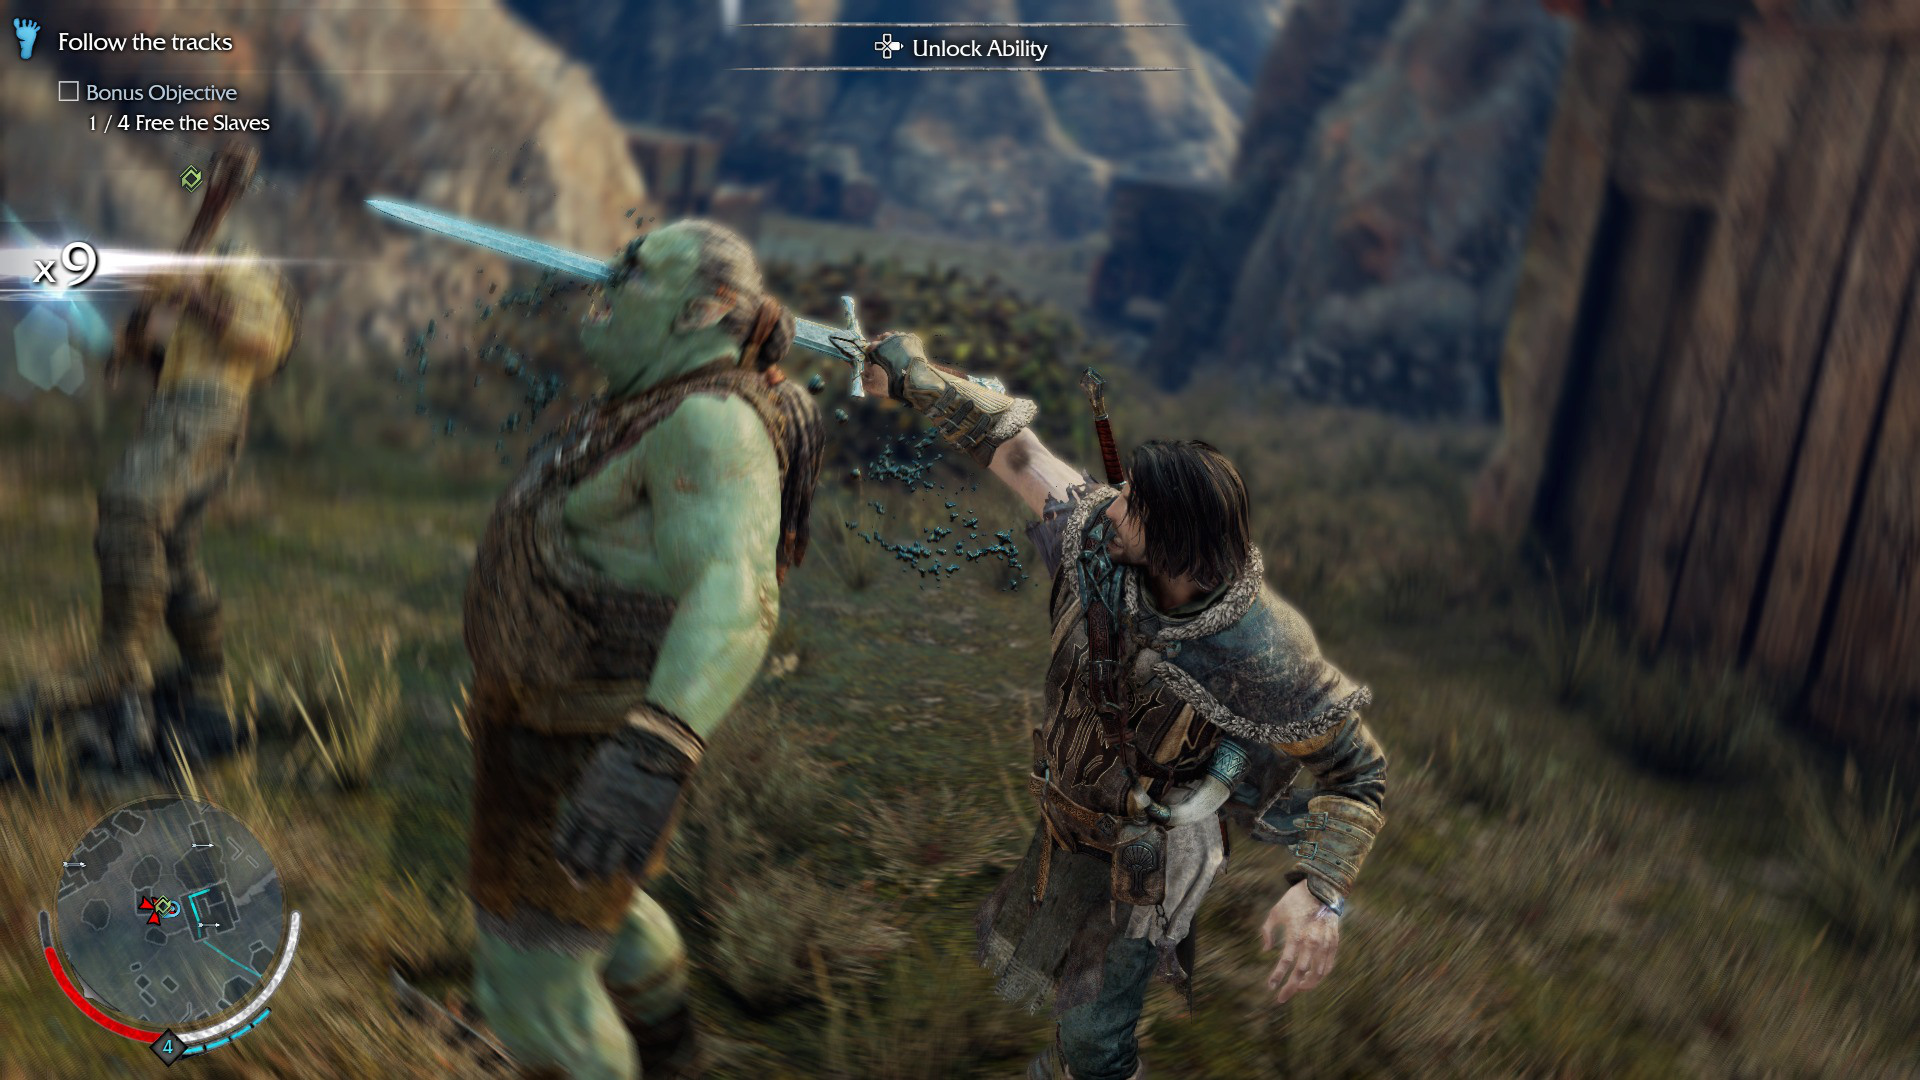 Middle-earth: Shadow of Mordor (PS4) Review – ZTGD